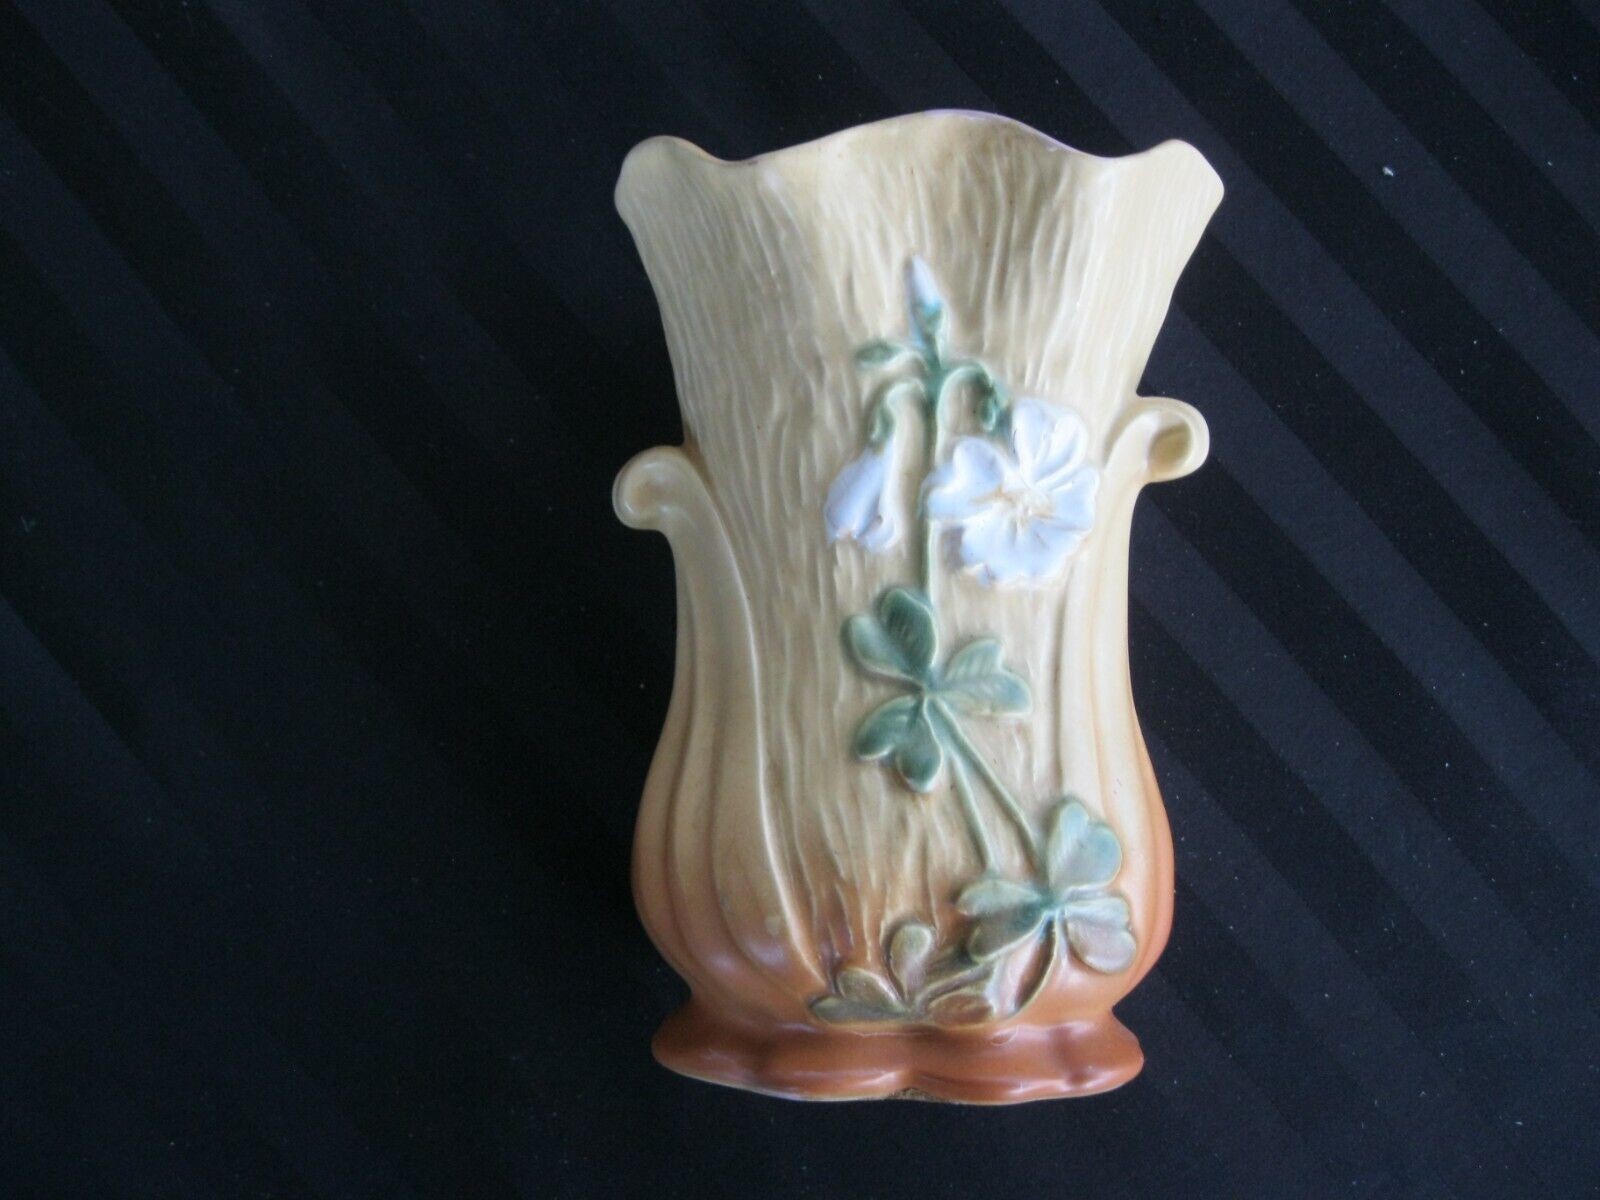 C-290 Vintage Weller Pottery 8 Inch Peach Vase with Raised Relief Flowers